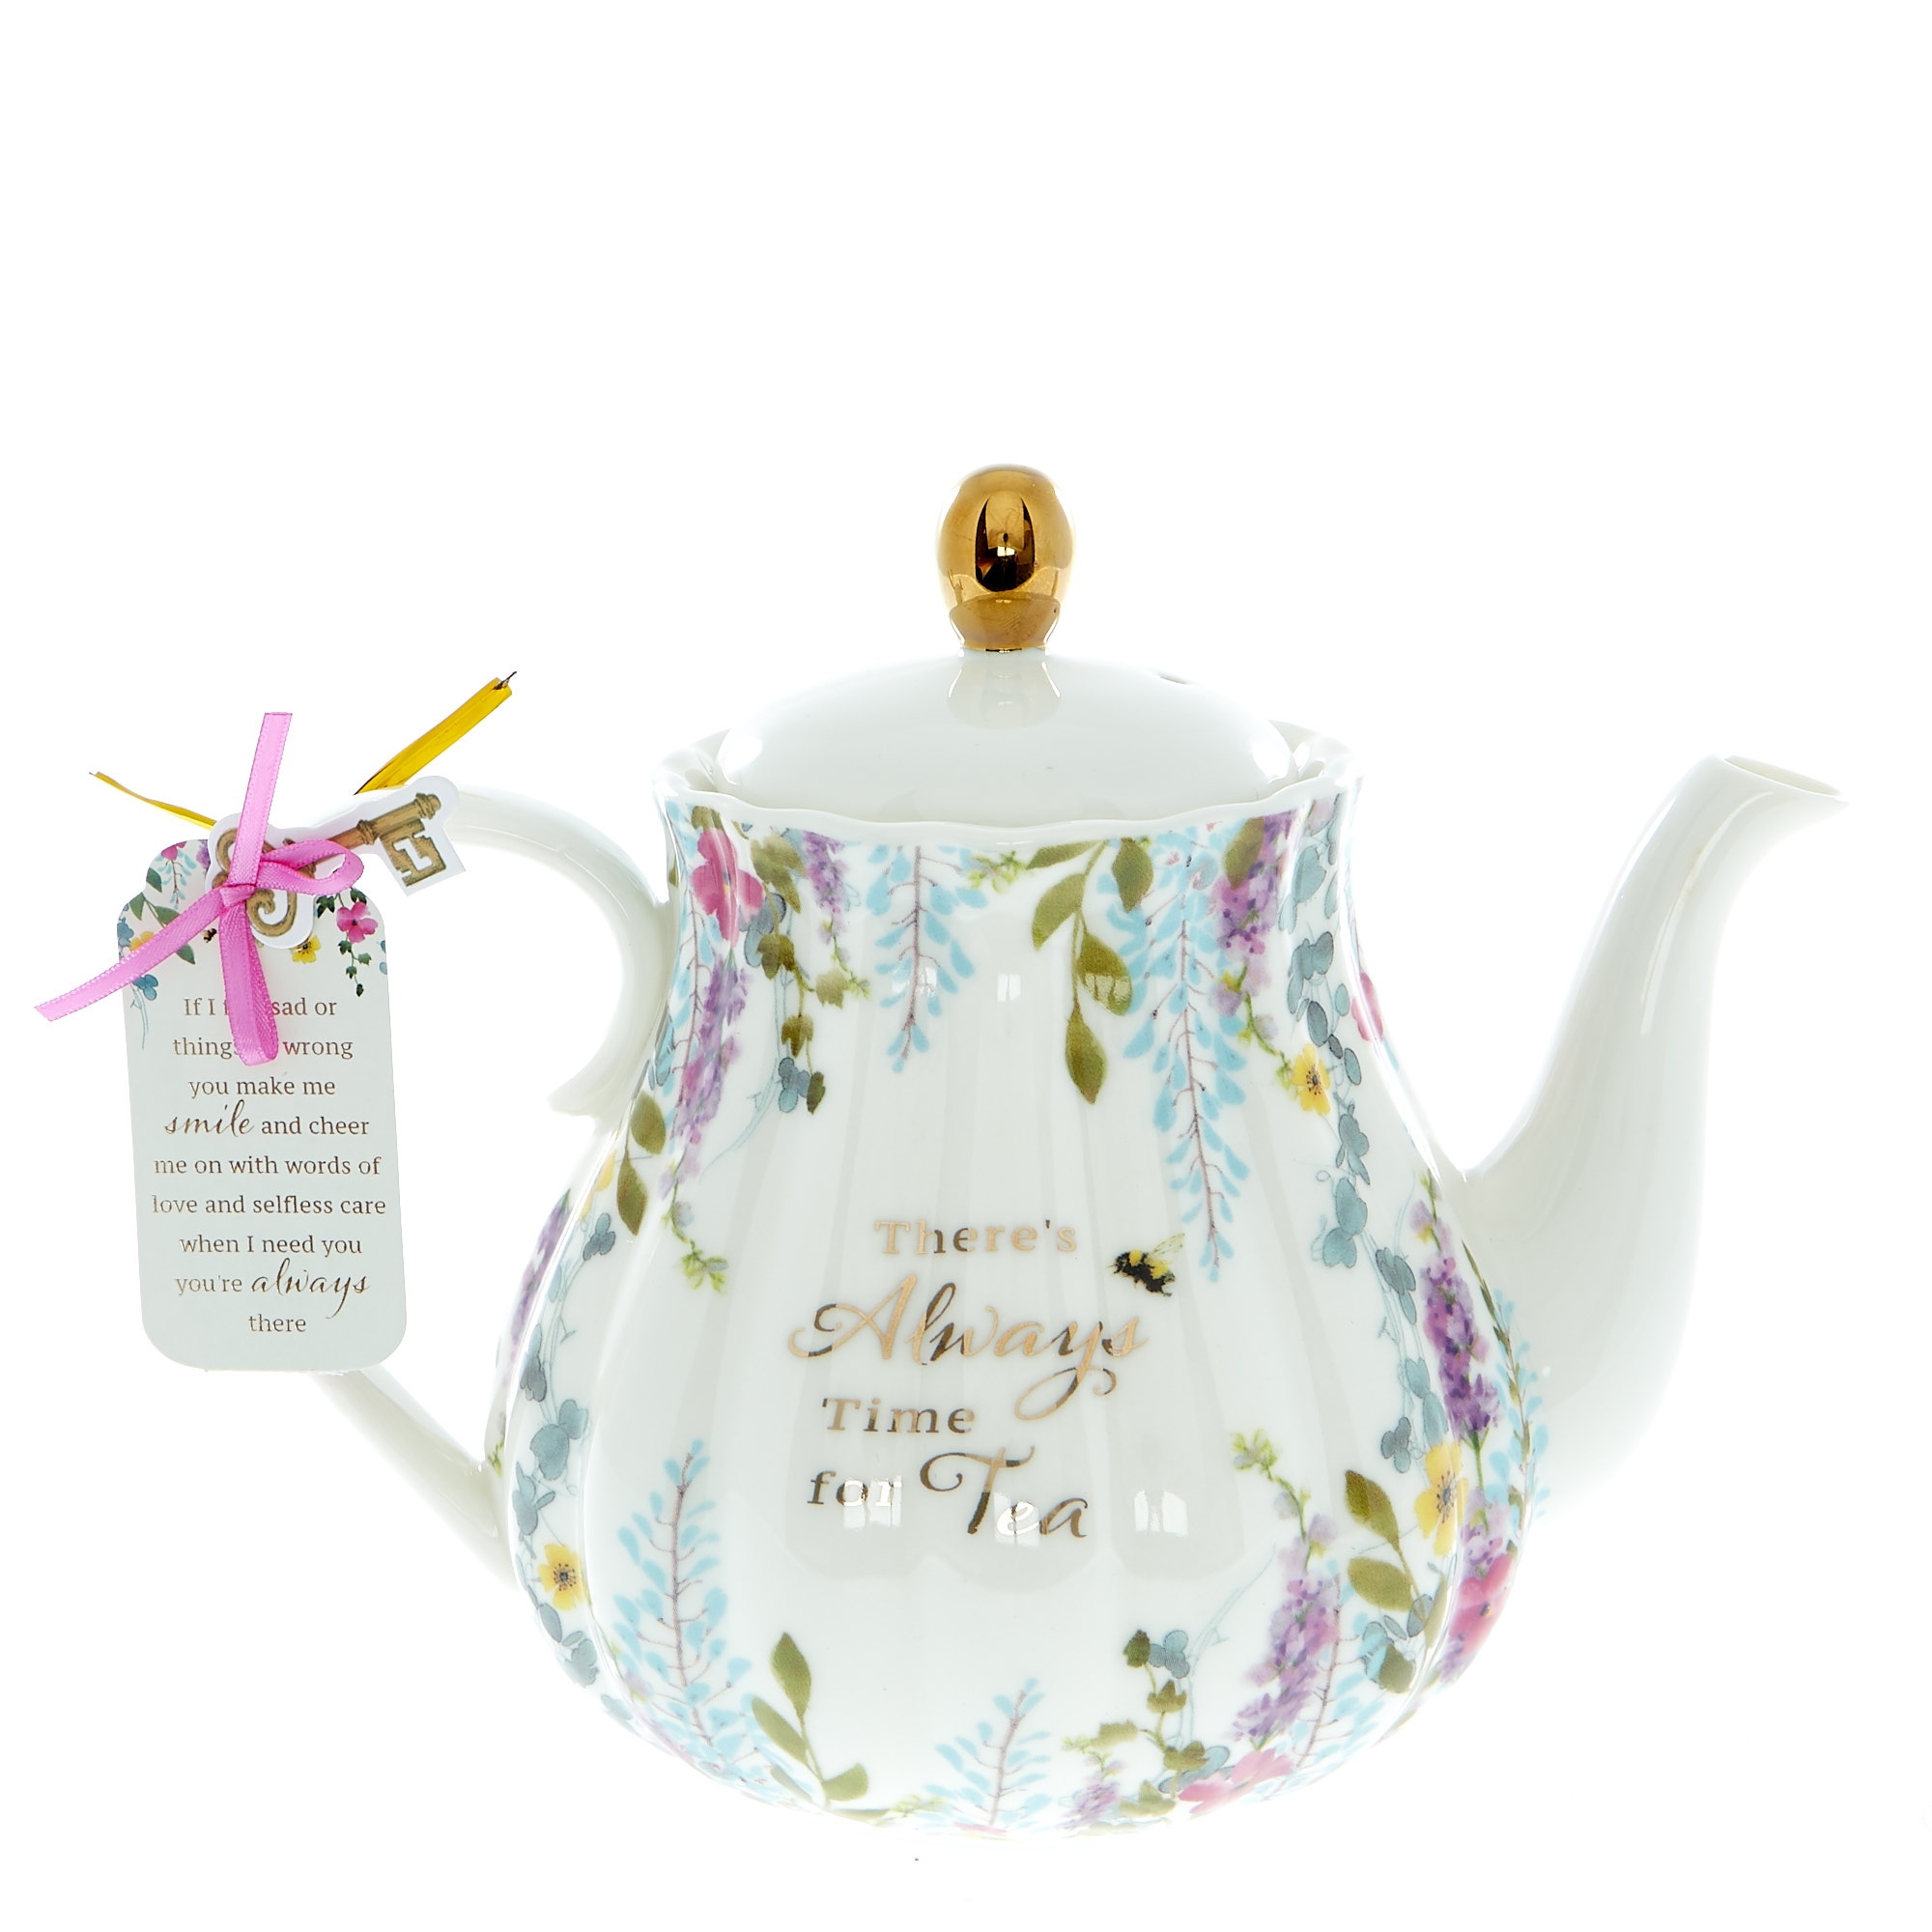 There's Always Time For Tea Ceramic Teapot 